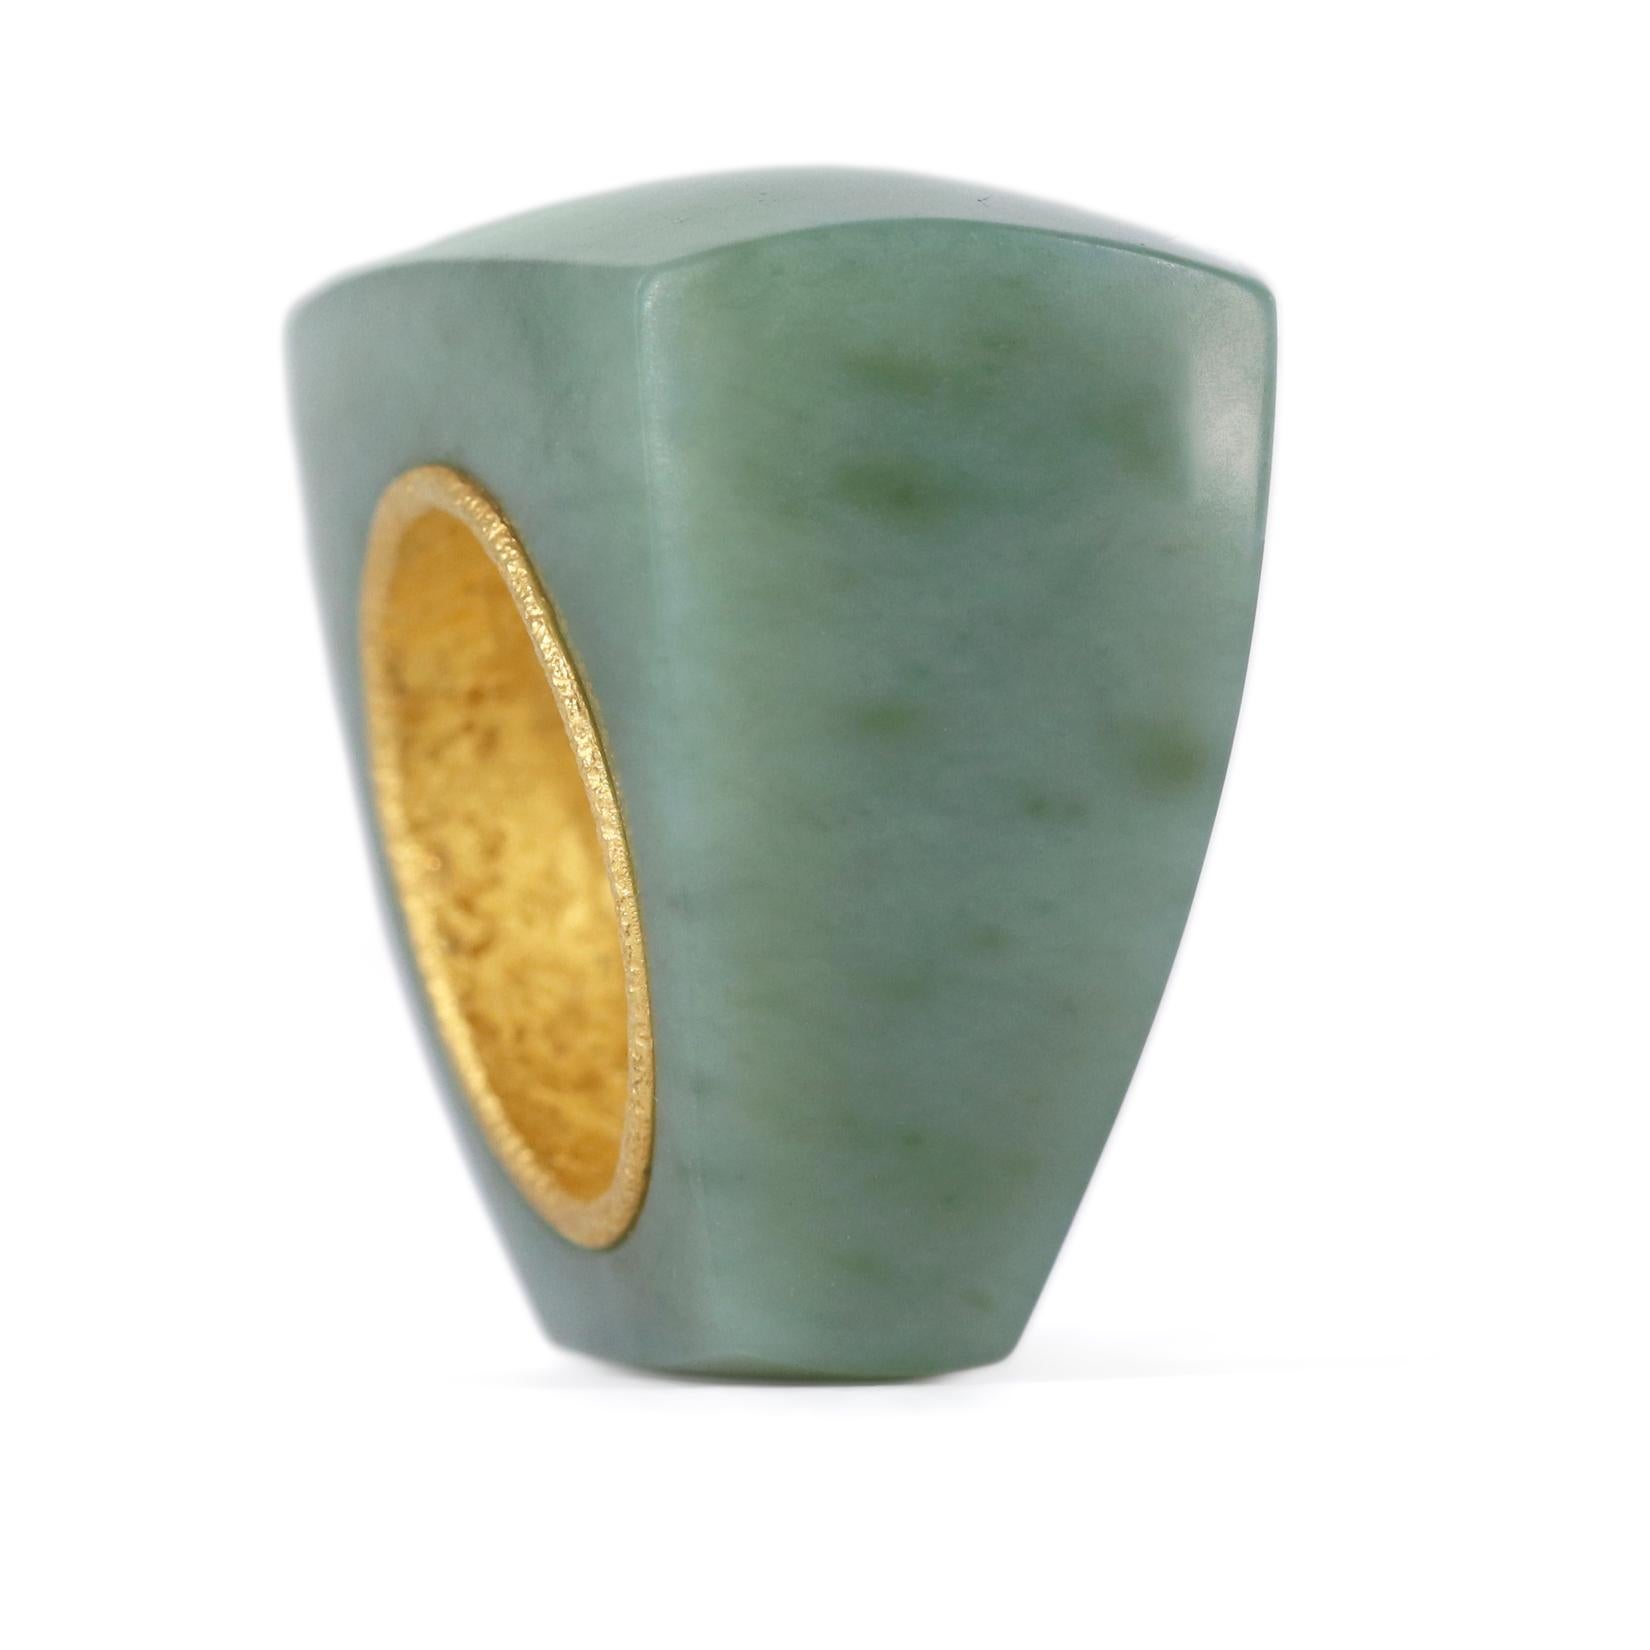 One of a Kind Ring hand-fabricated by acclaimed jewelry maker Devta Doolan featuring a magnificent piece of New Zealand jade hand-carved and polished into the shape of a ring by a master gem cutter in New Zealand. A signature-finished, finely